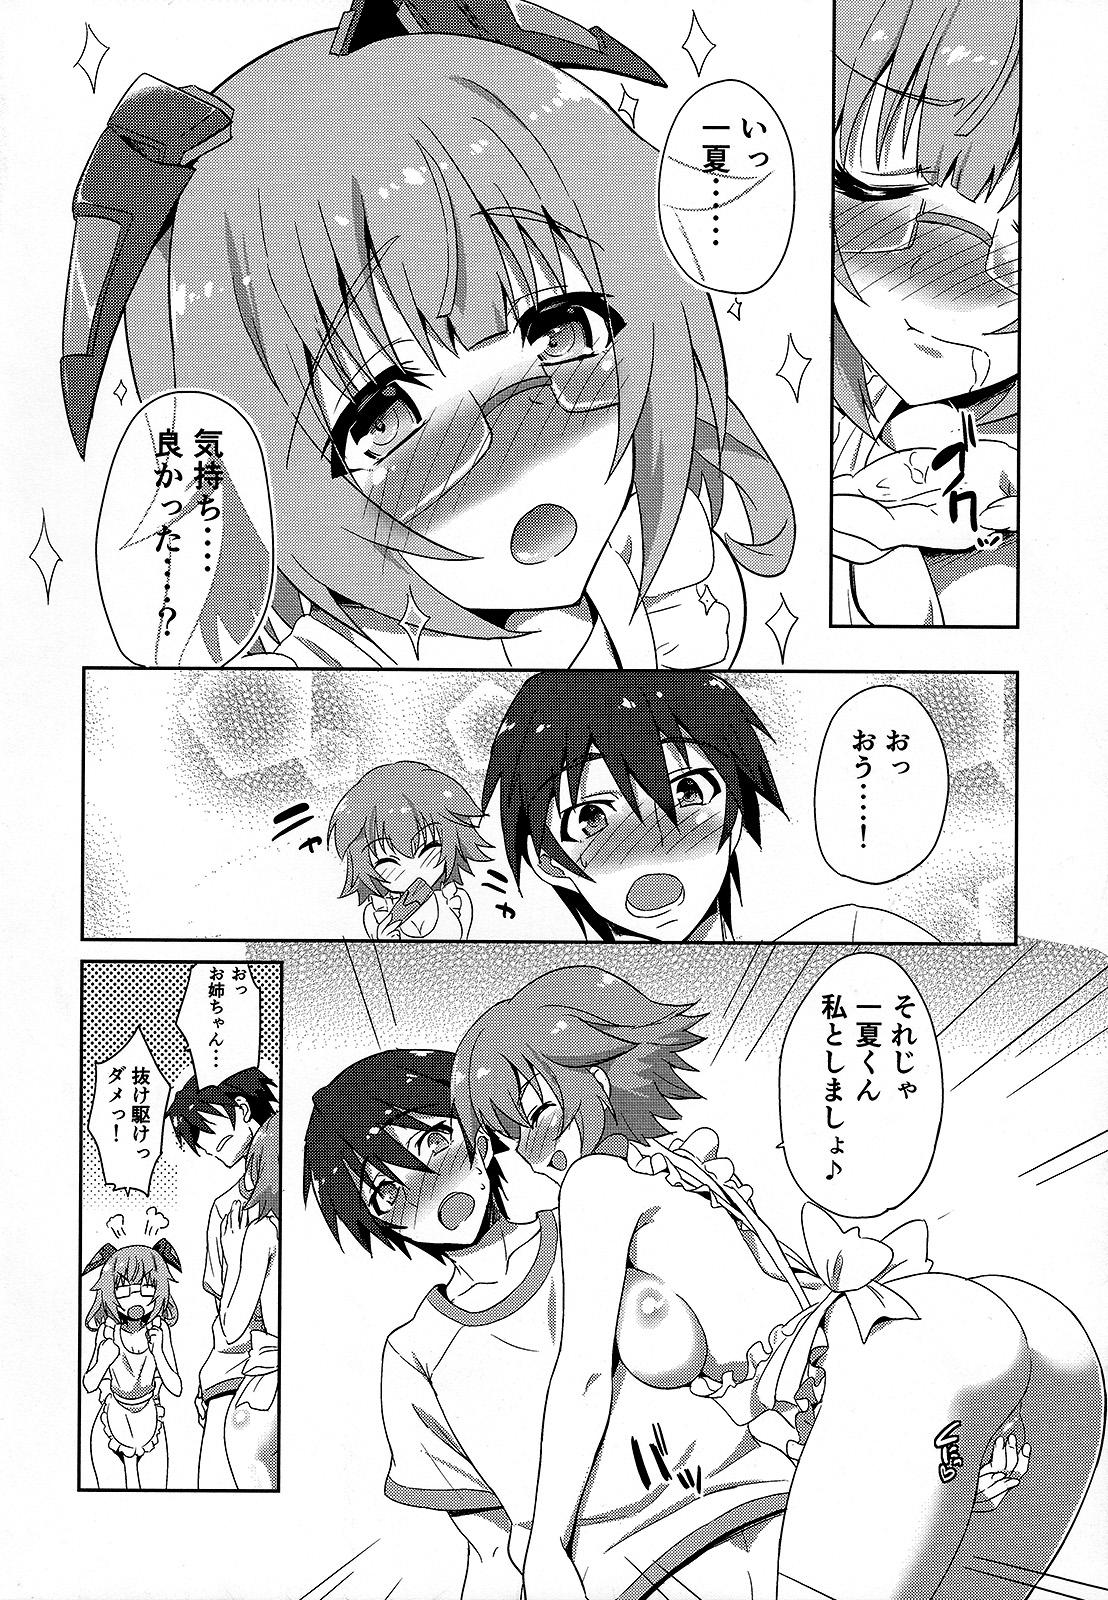 Boquete IS ICHIKA LOVE SISTERS!! - Infinite stratos Tight Pussy Fucked - Page 9